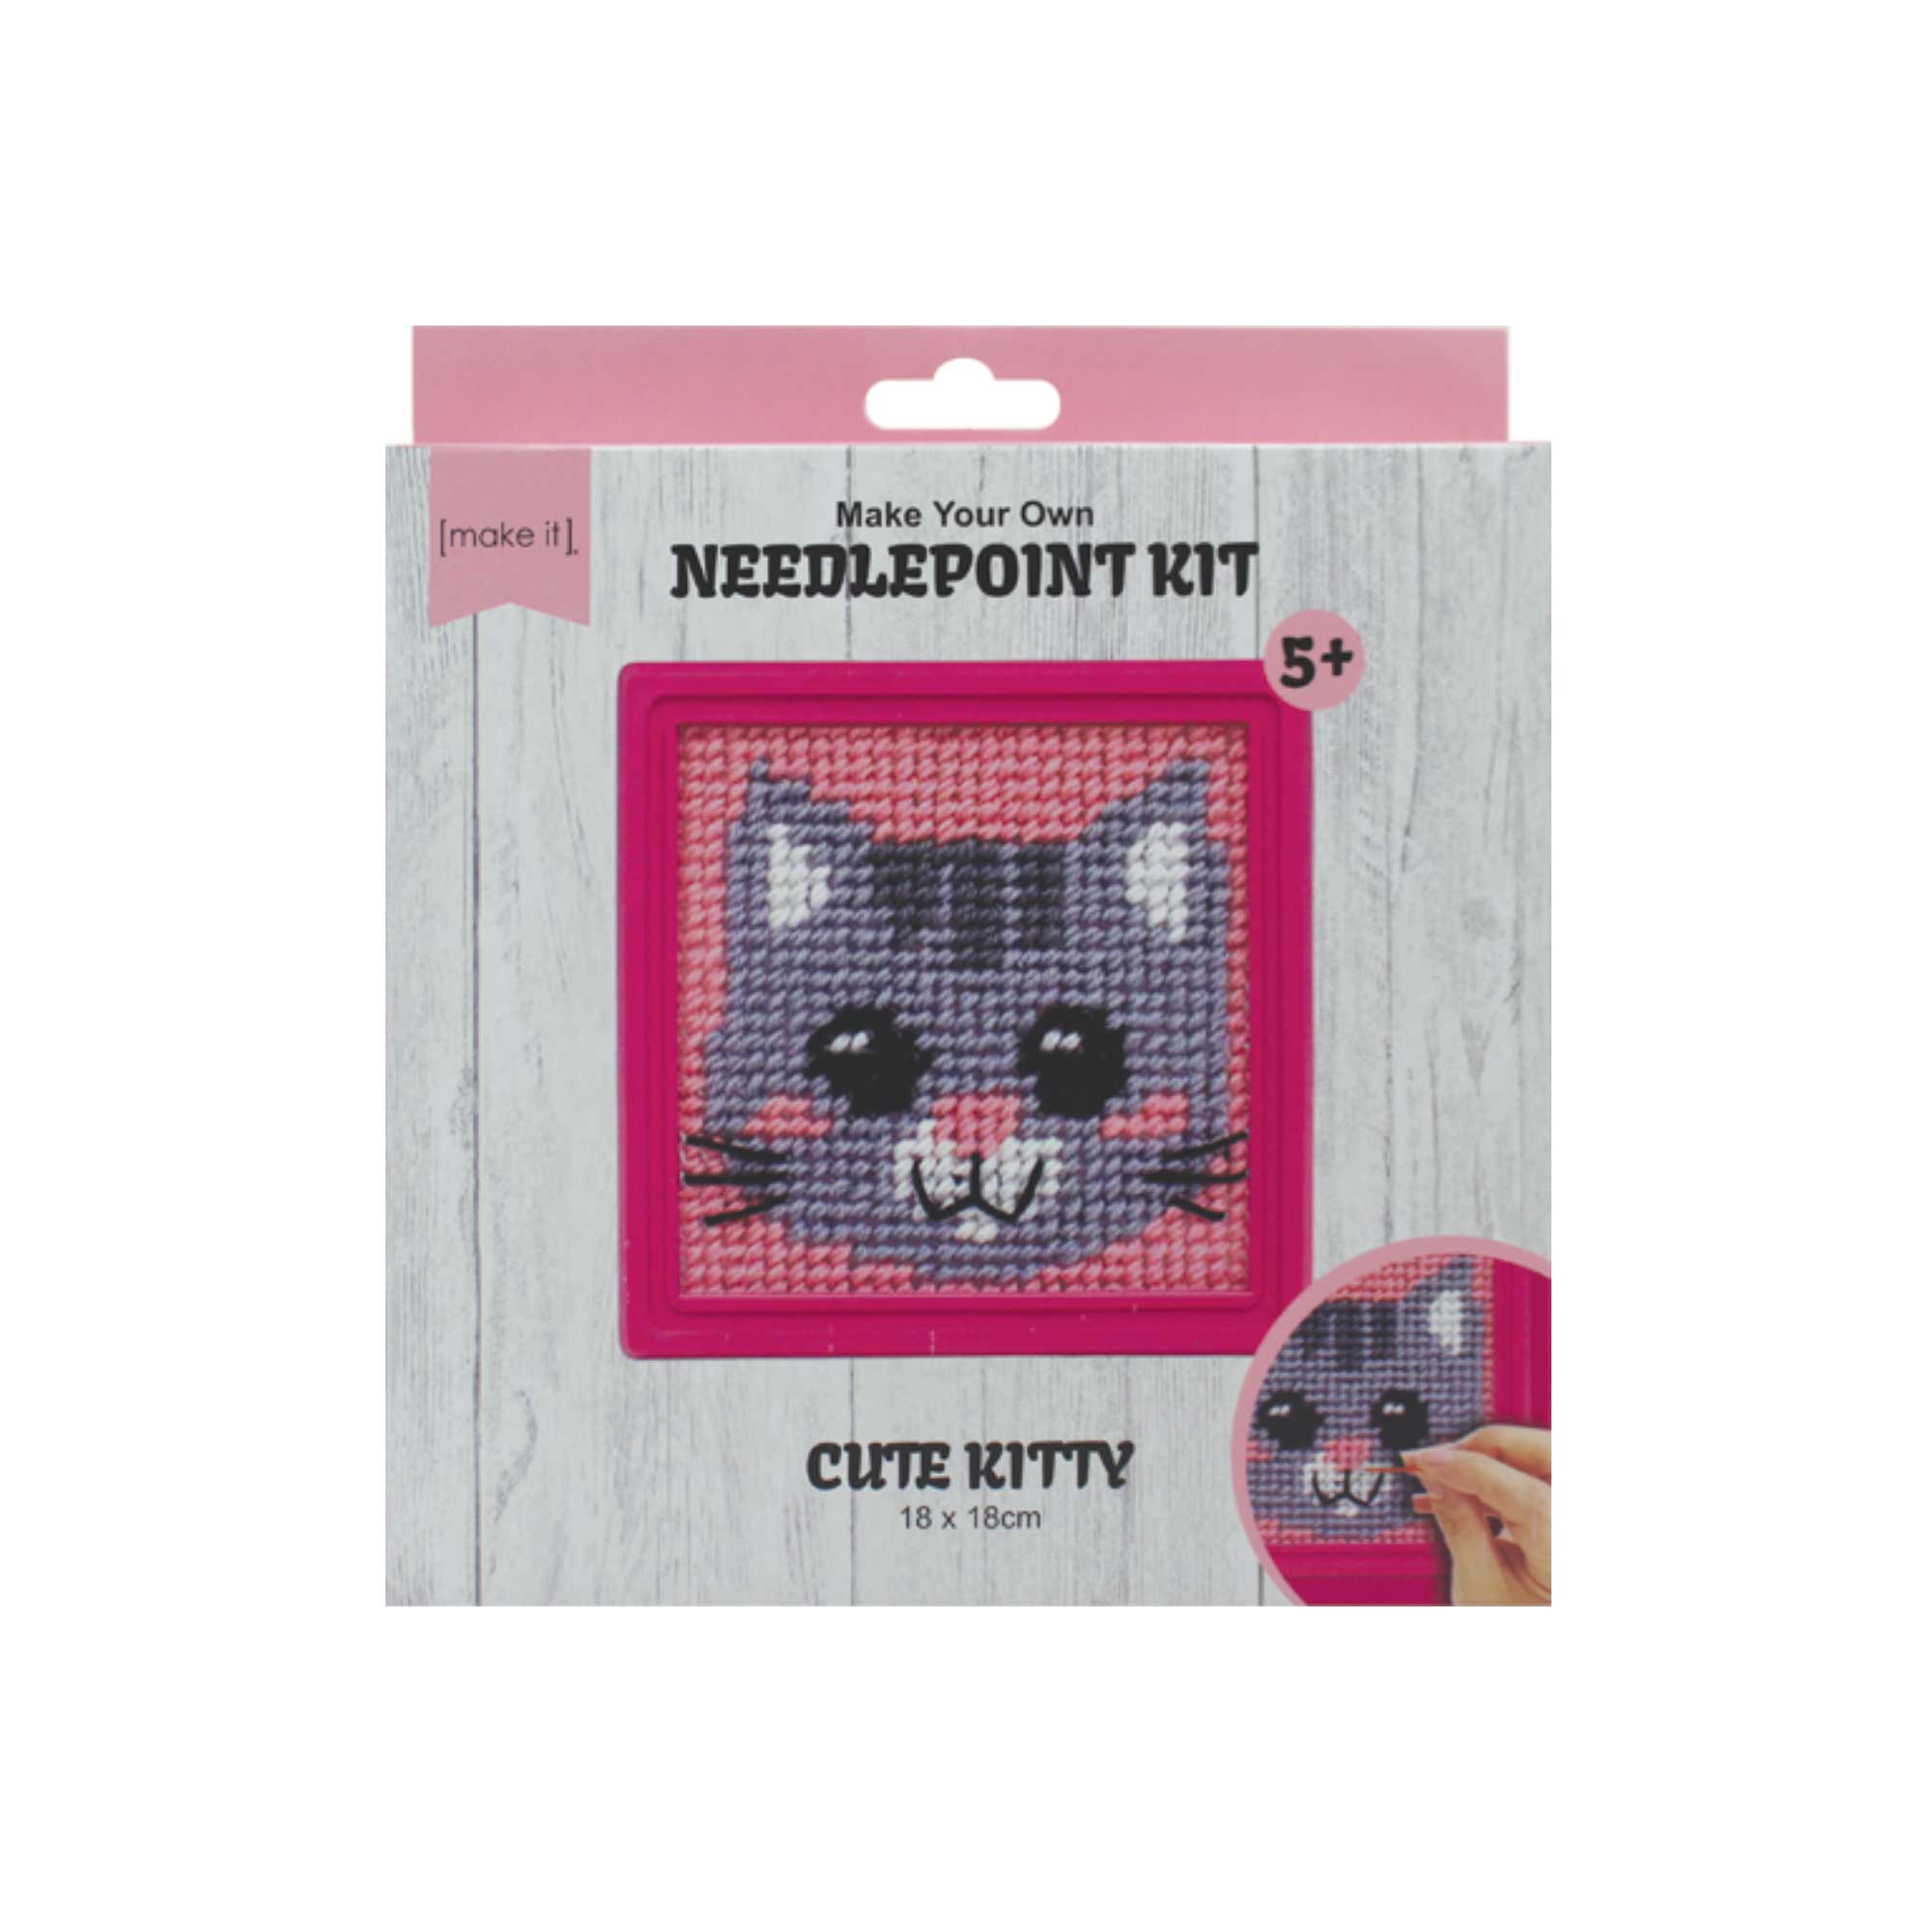 Make It Make Your Own Needlepoint Kit Cute Kitty